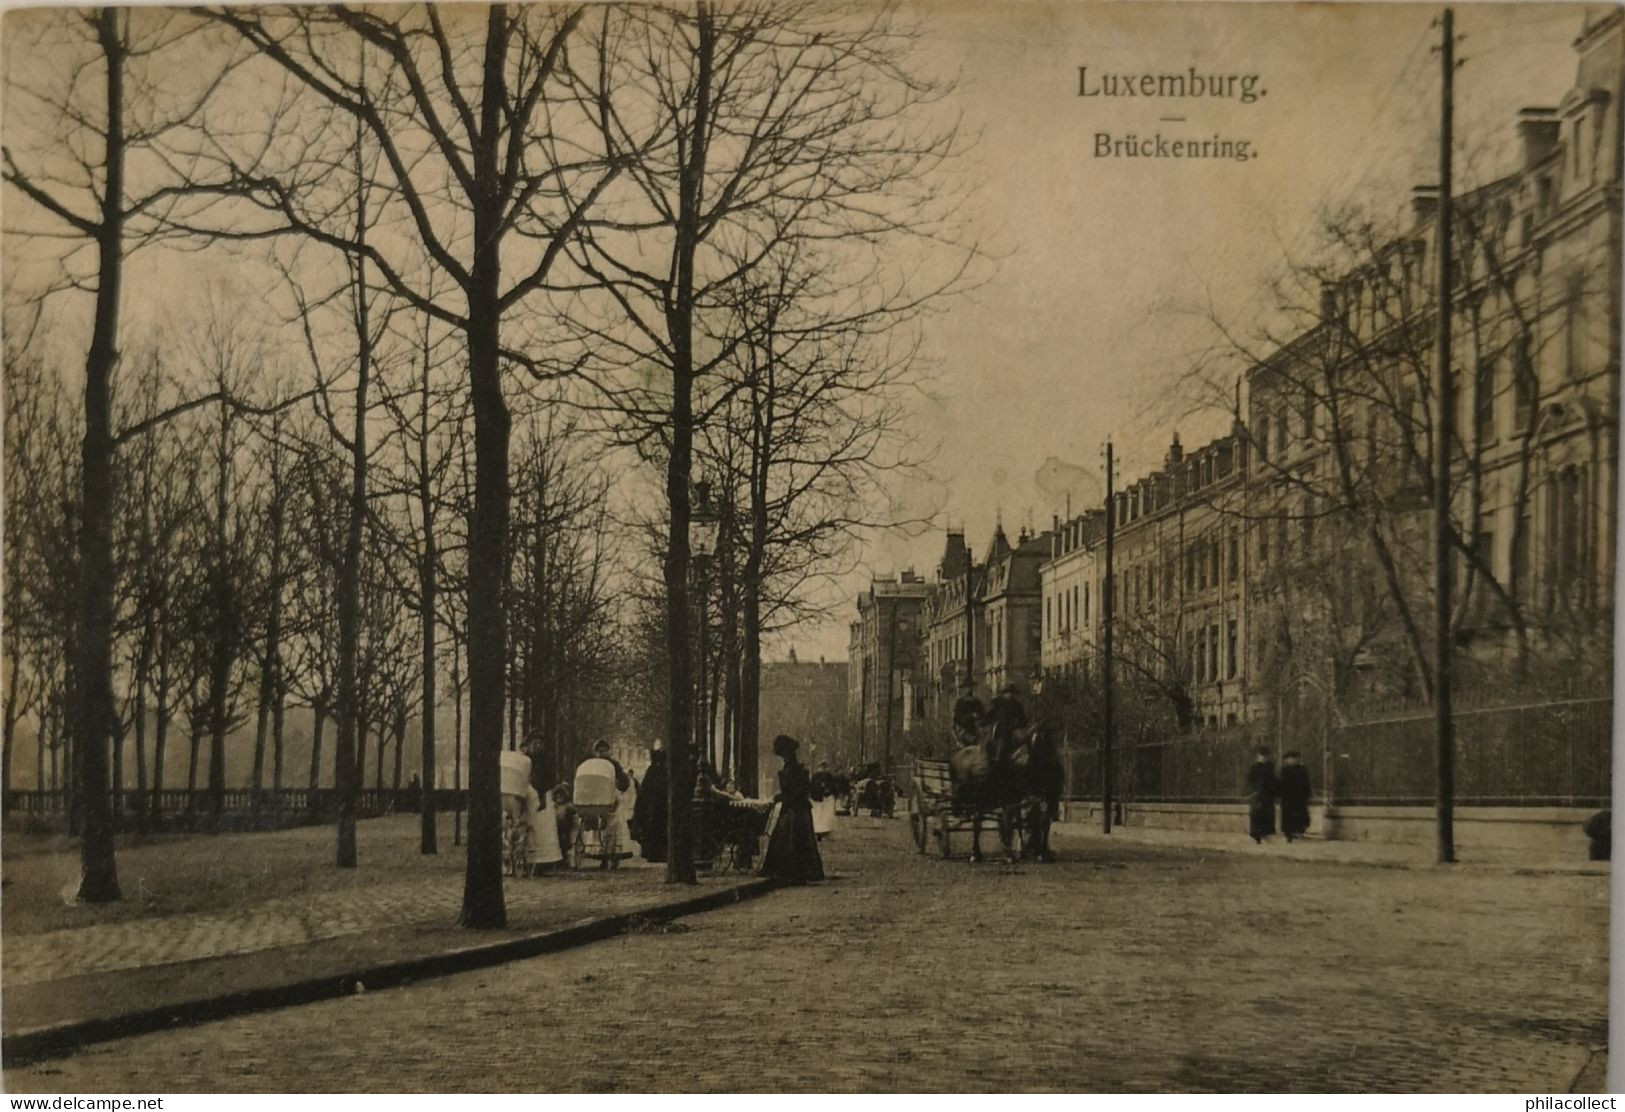 Luxembourg (Luxembourg) Bruckenring 19?? - Luxemburg - Town